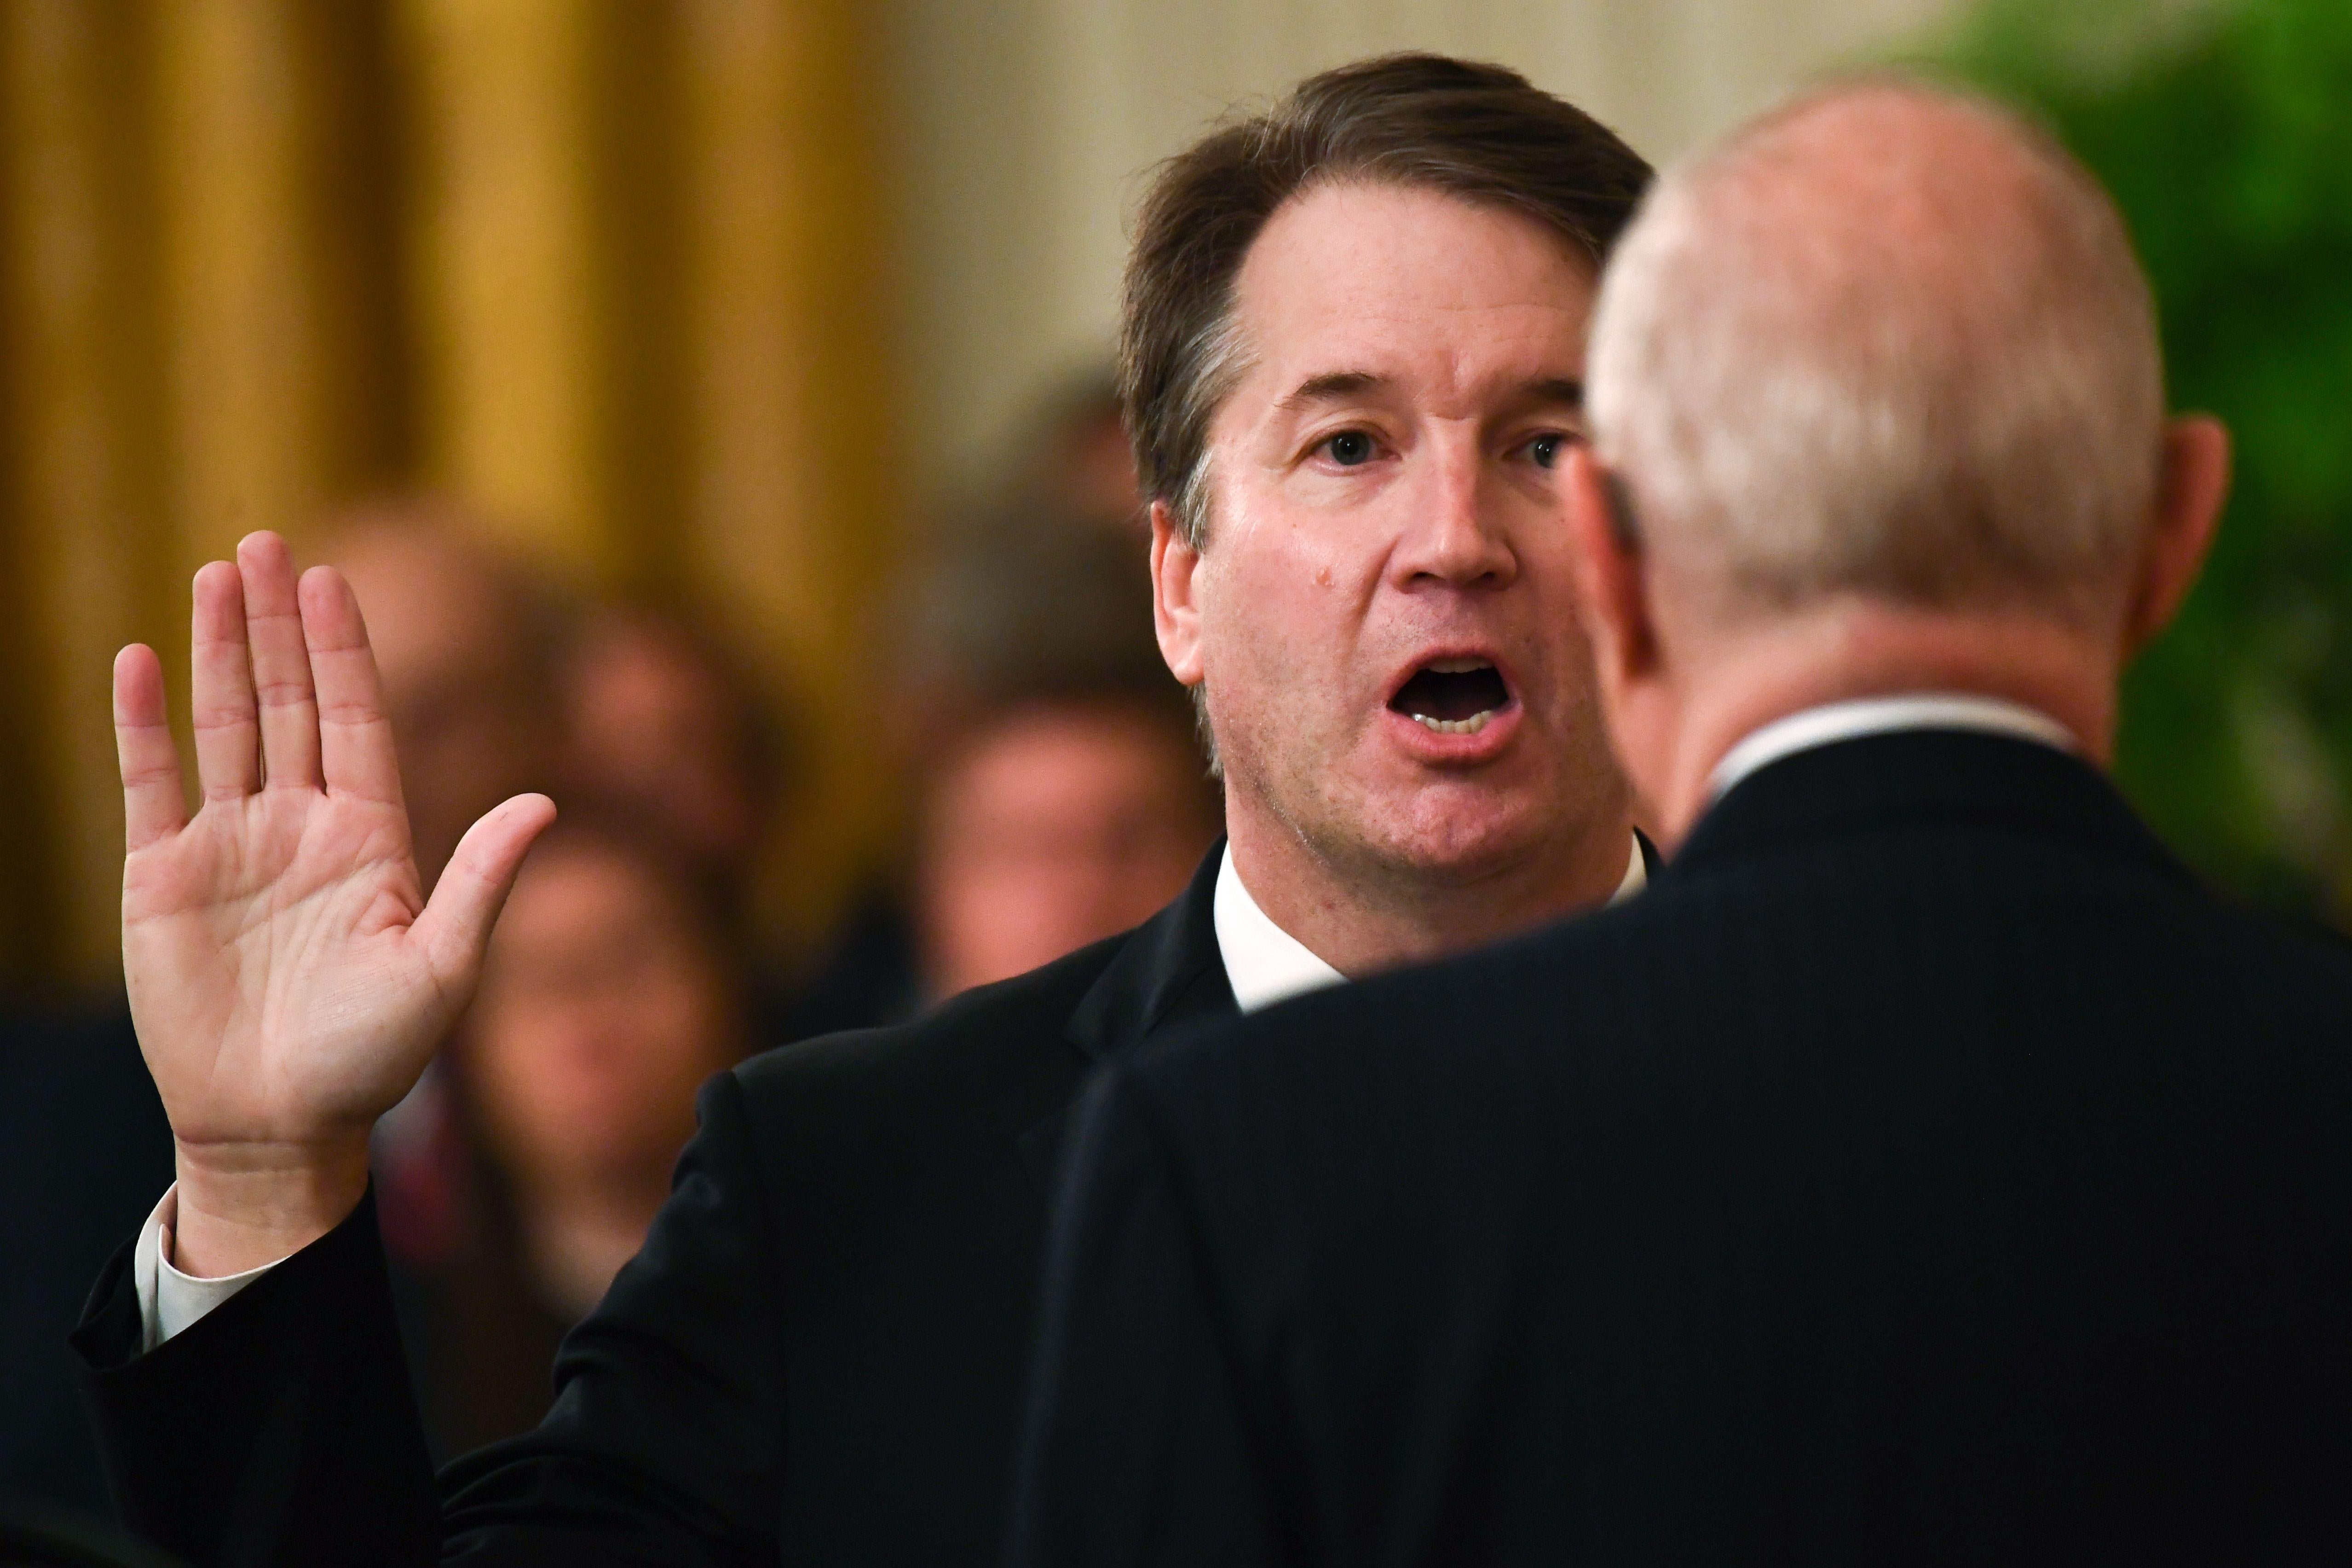 Kavanaugh raises his right hand as he faces Kennedy, who is seen from behind.